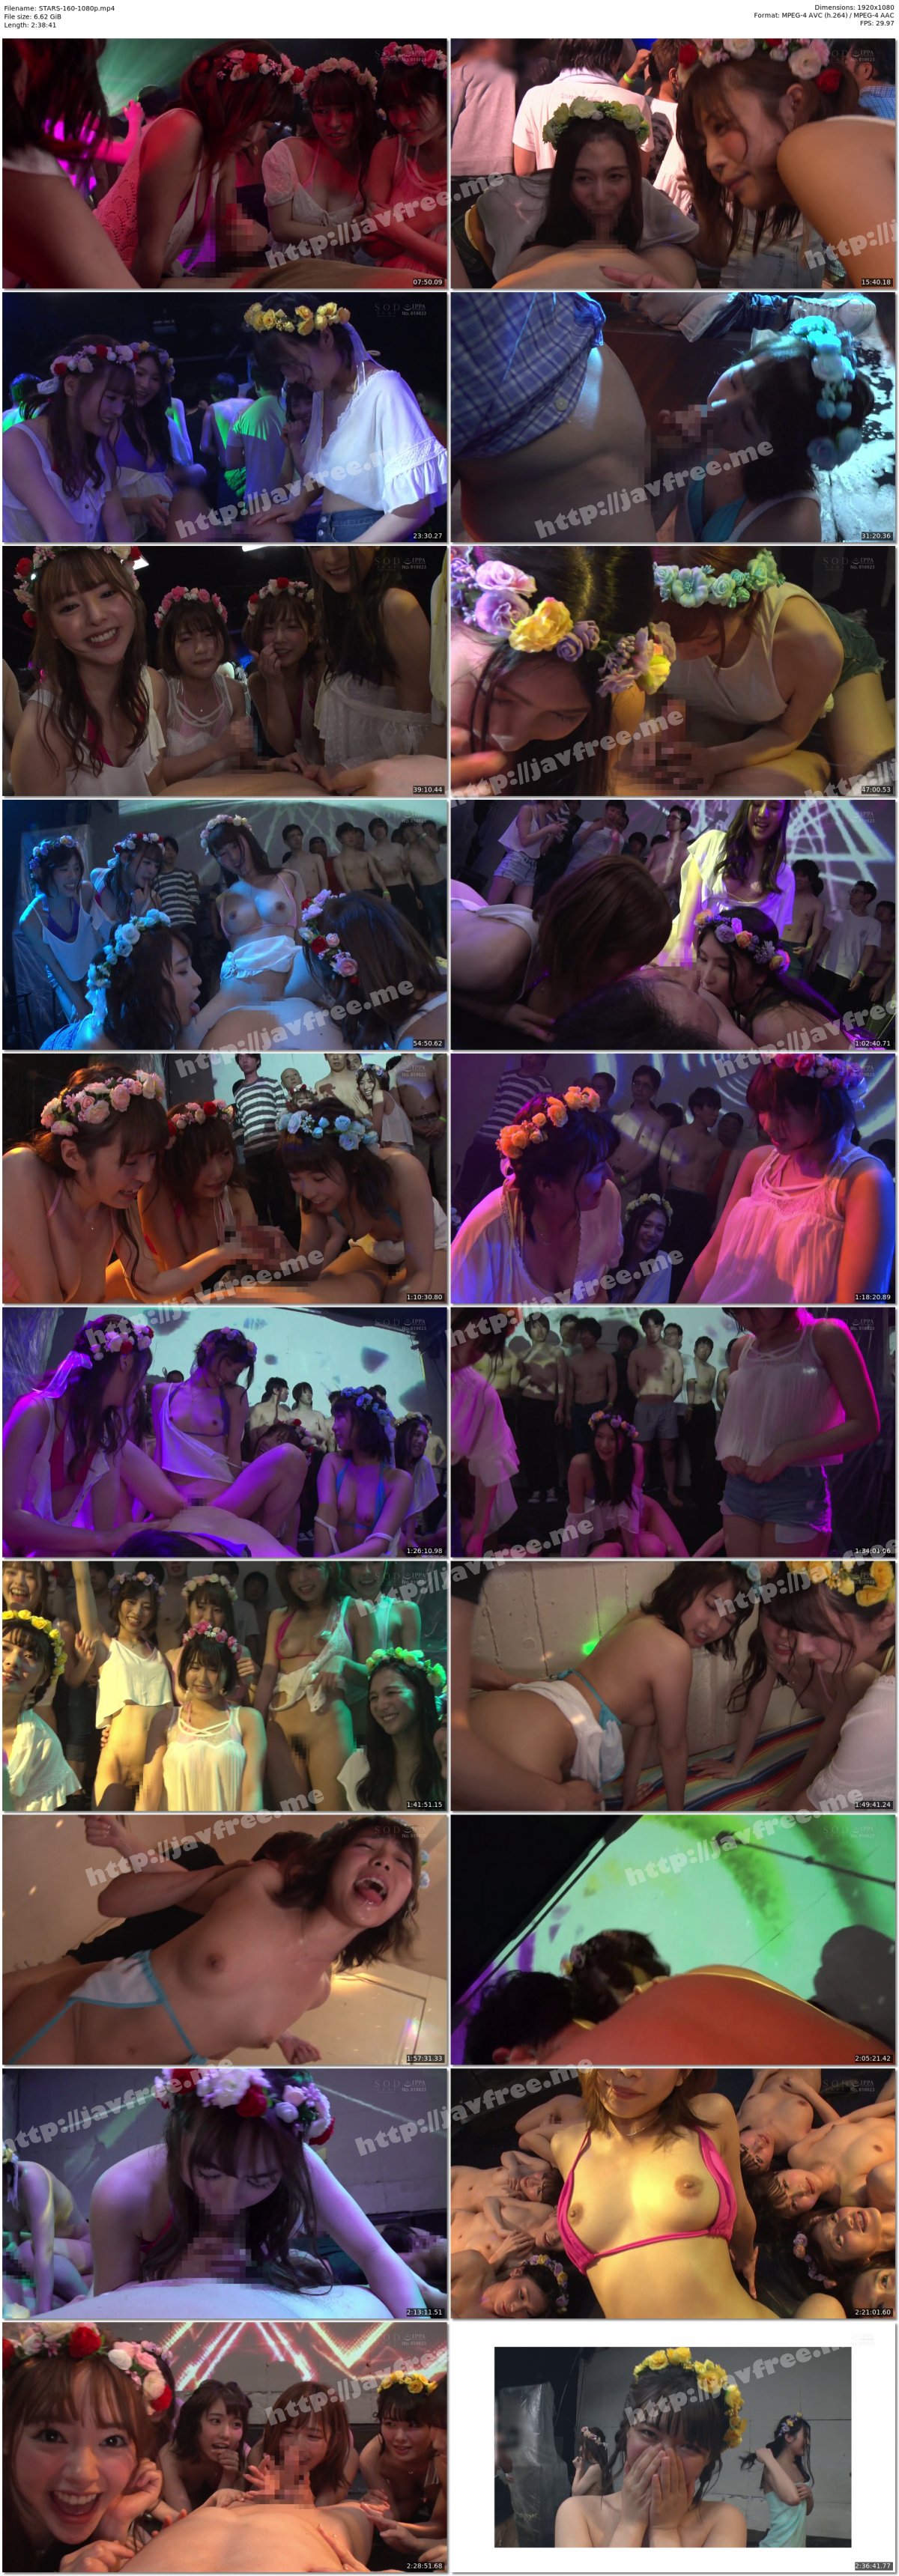 [HD][STARS-160] SODstar 10 SEX AFTER PARTY 2019 ～クラブでハメハメヌキまくり編～ - image STARS-160-1080p on https://javfree.me